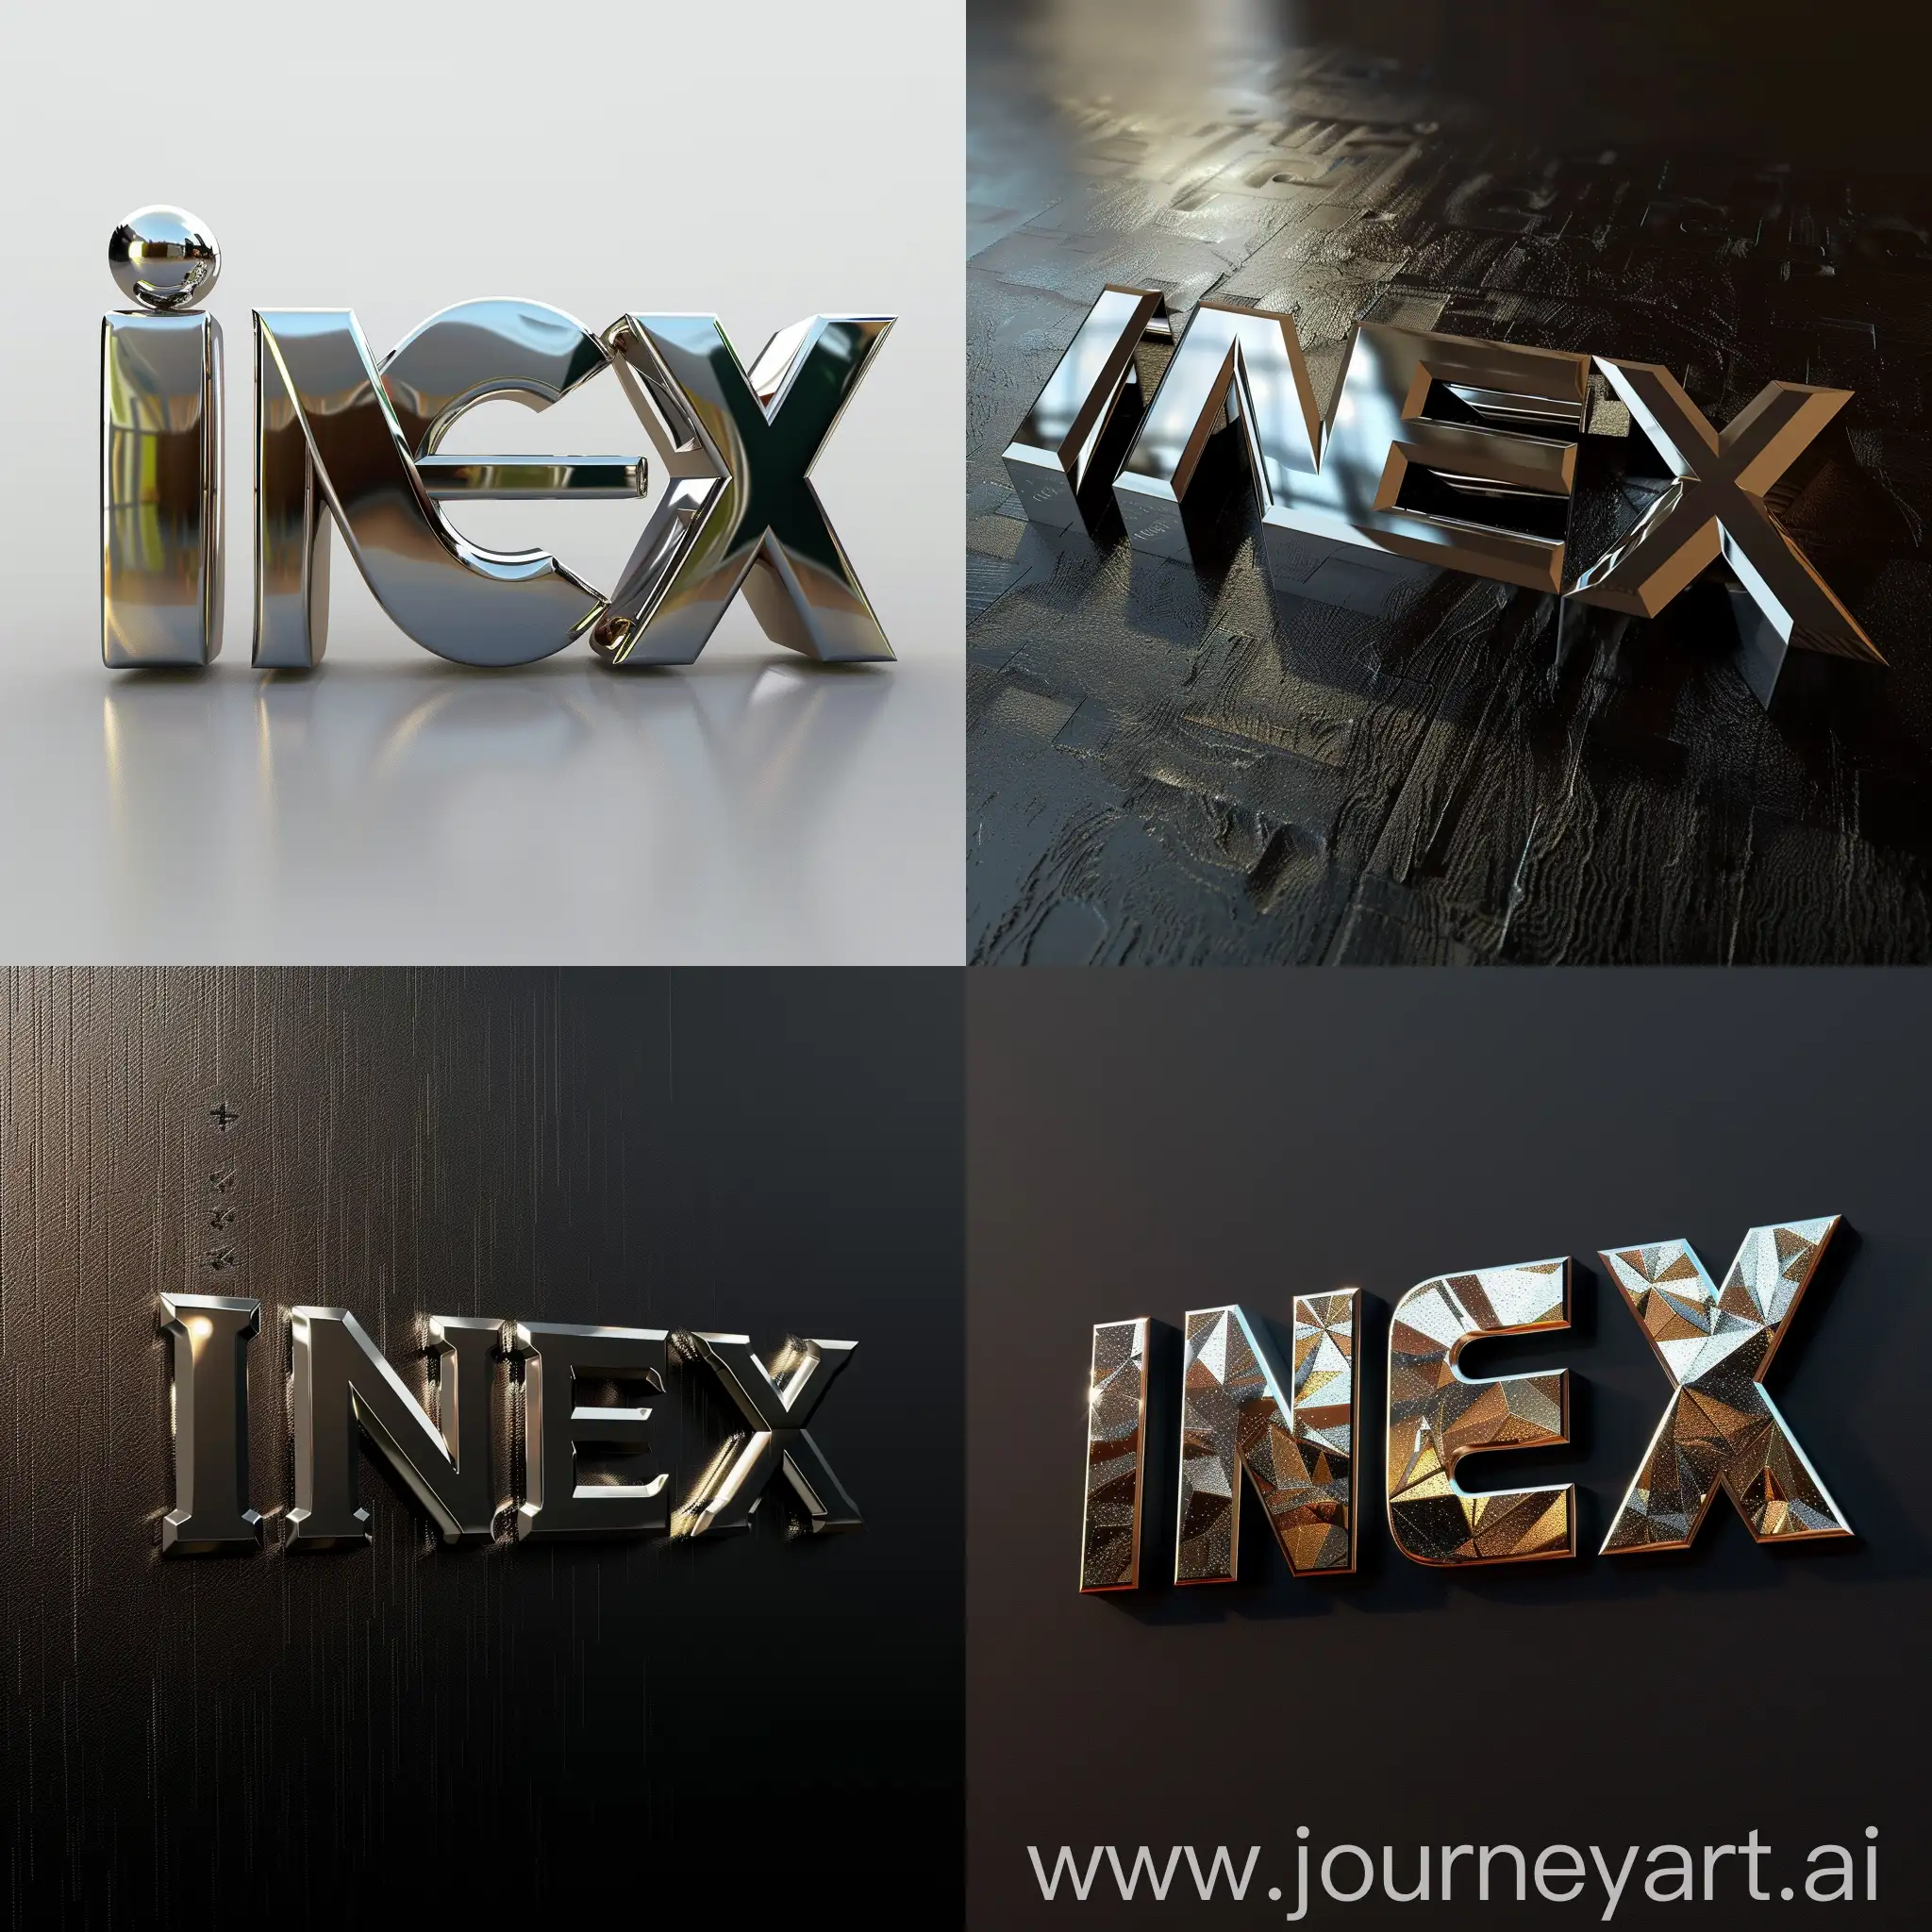 Logo INEX with metallic letters, reliable, honest, friendly